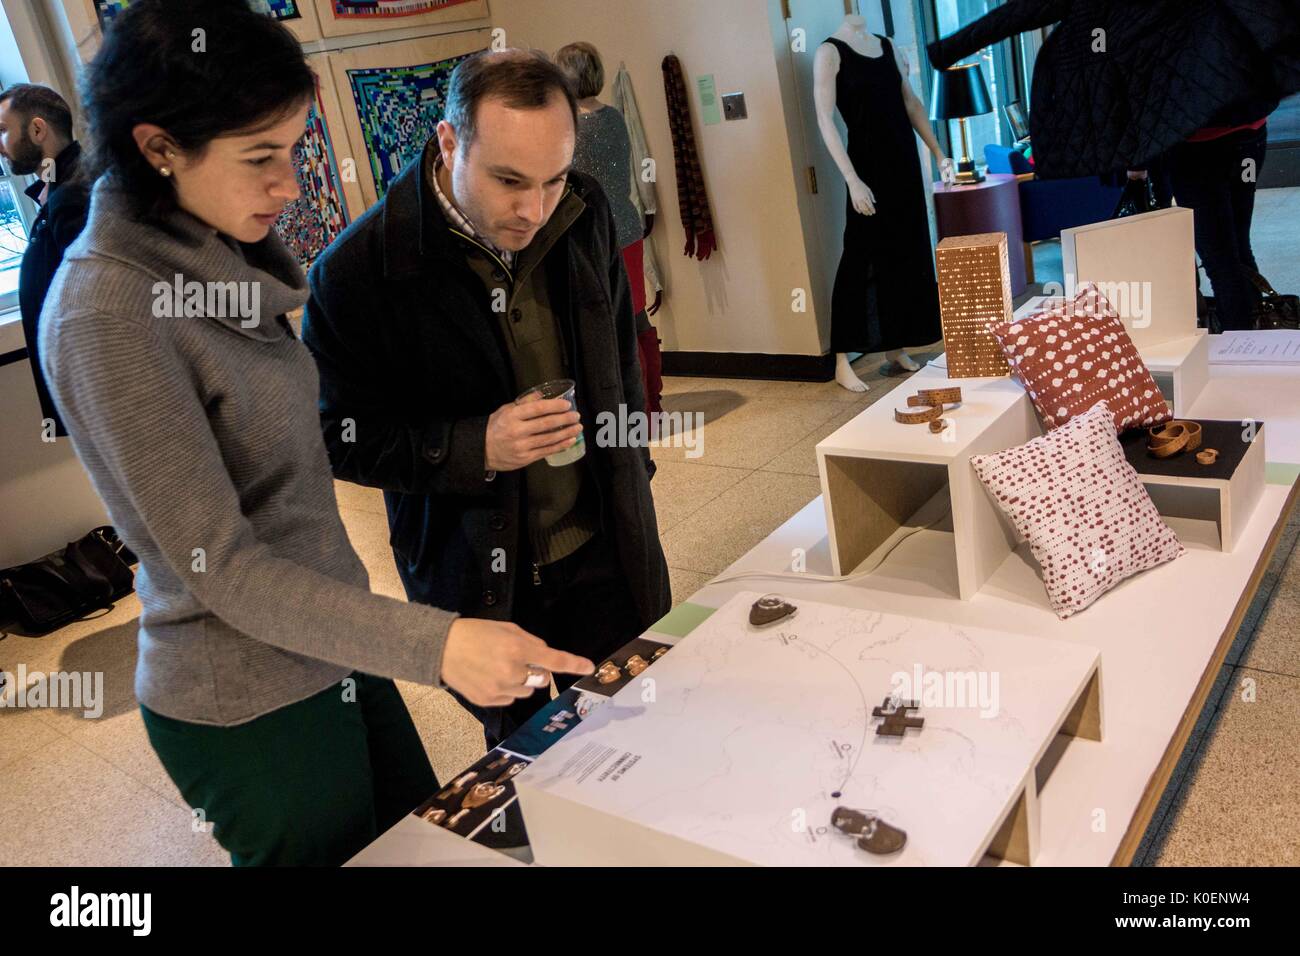 Two adults look down at a small art display on a long table filled with more displays, the woman points to something in the display at the Unravel the Code Opening at The Johns Hopkins University Sheridan Libraries, 2016. Courtesy Eric Chen. Stock Photo